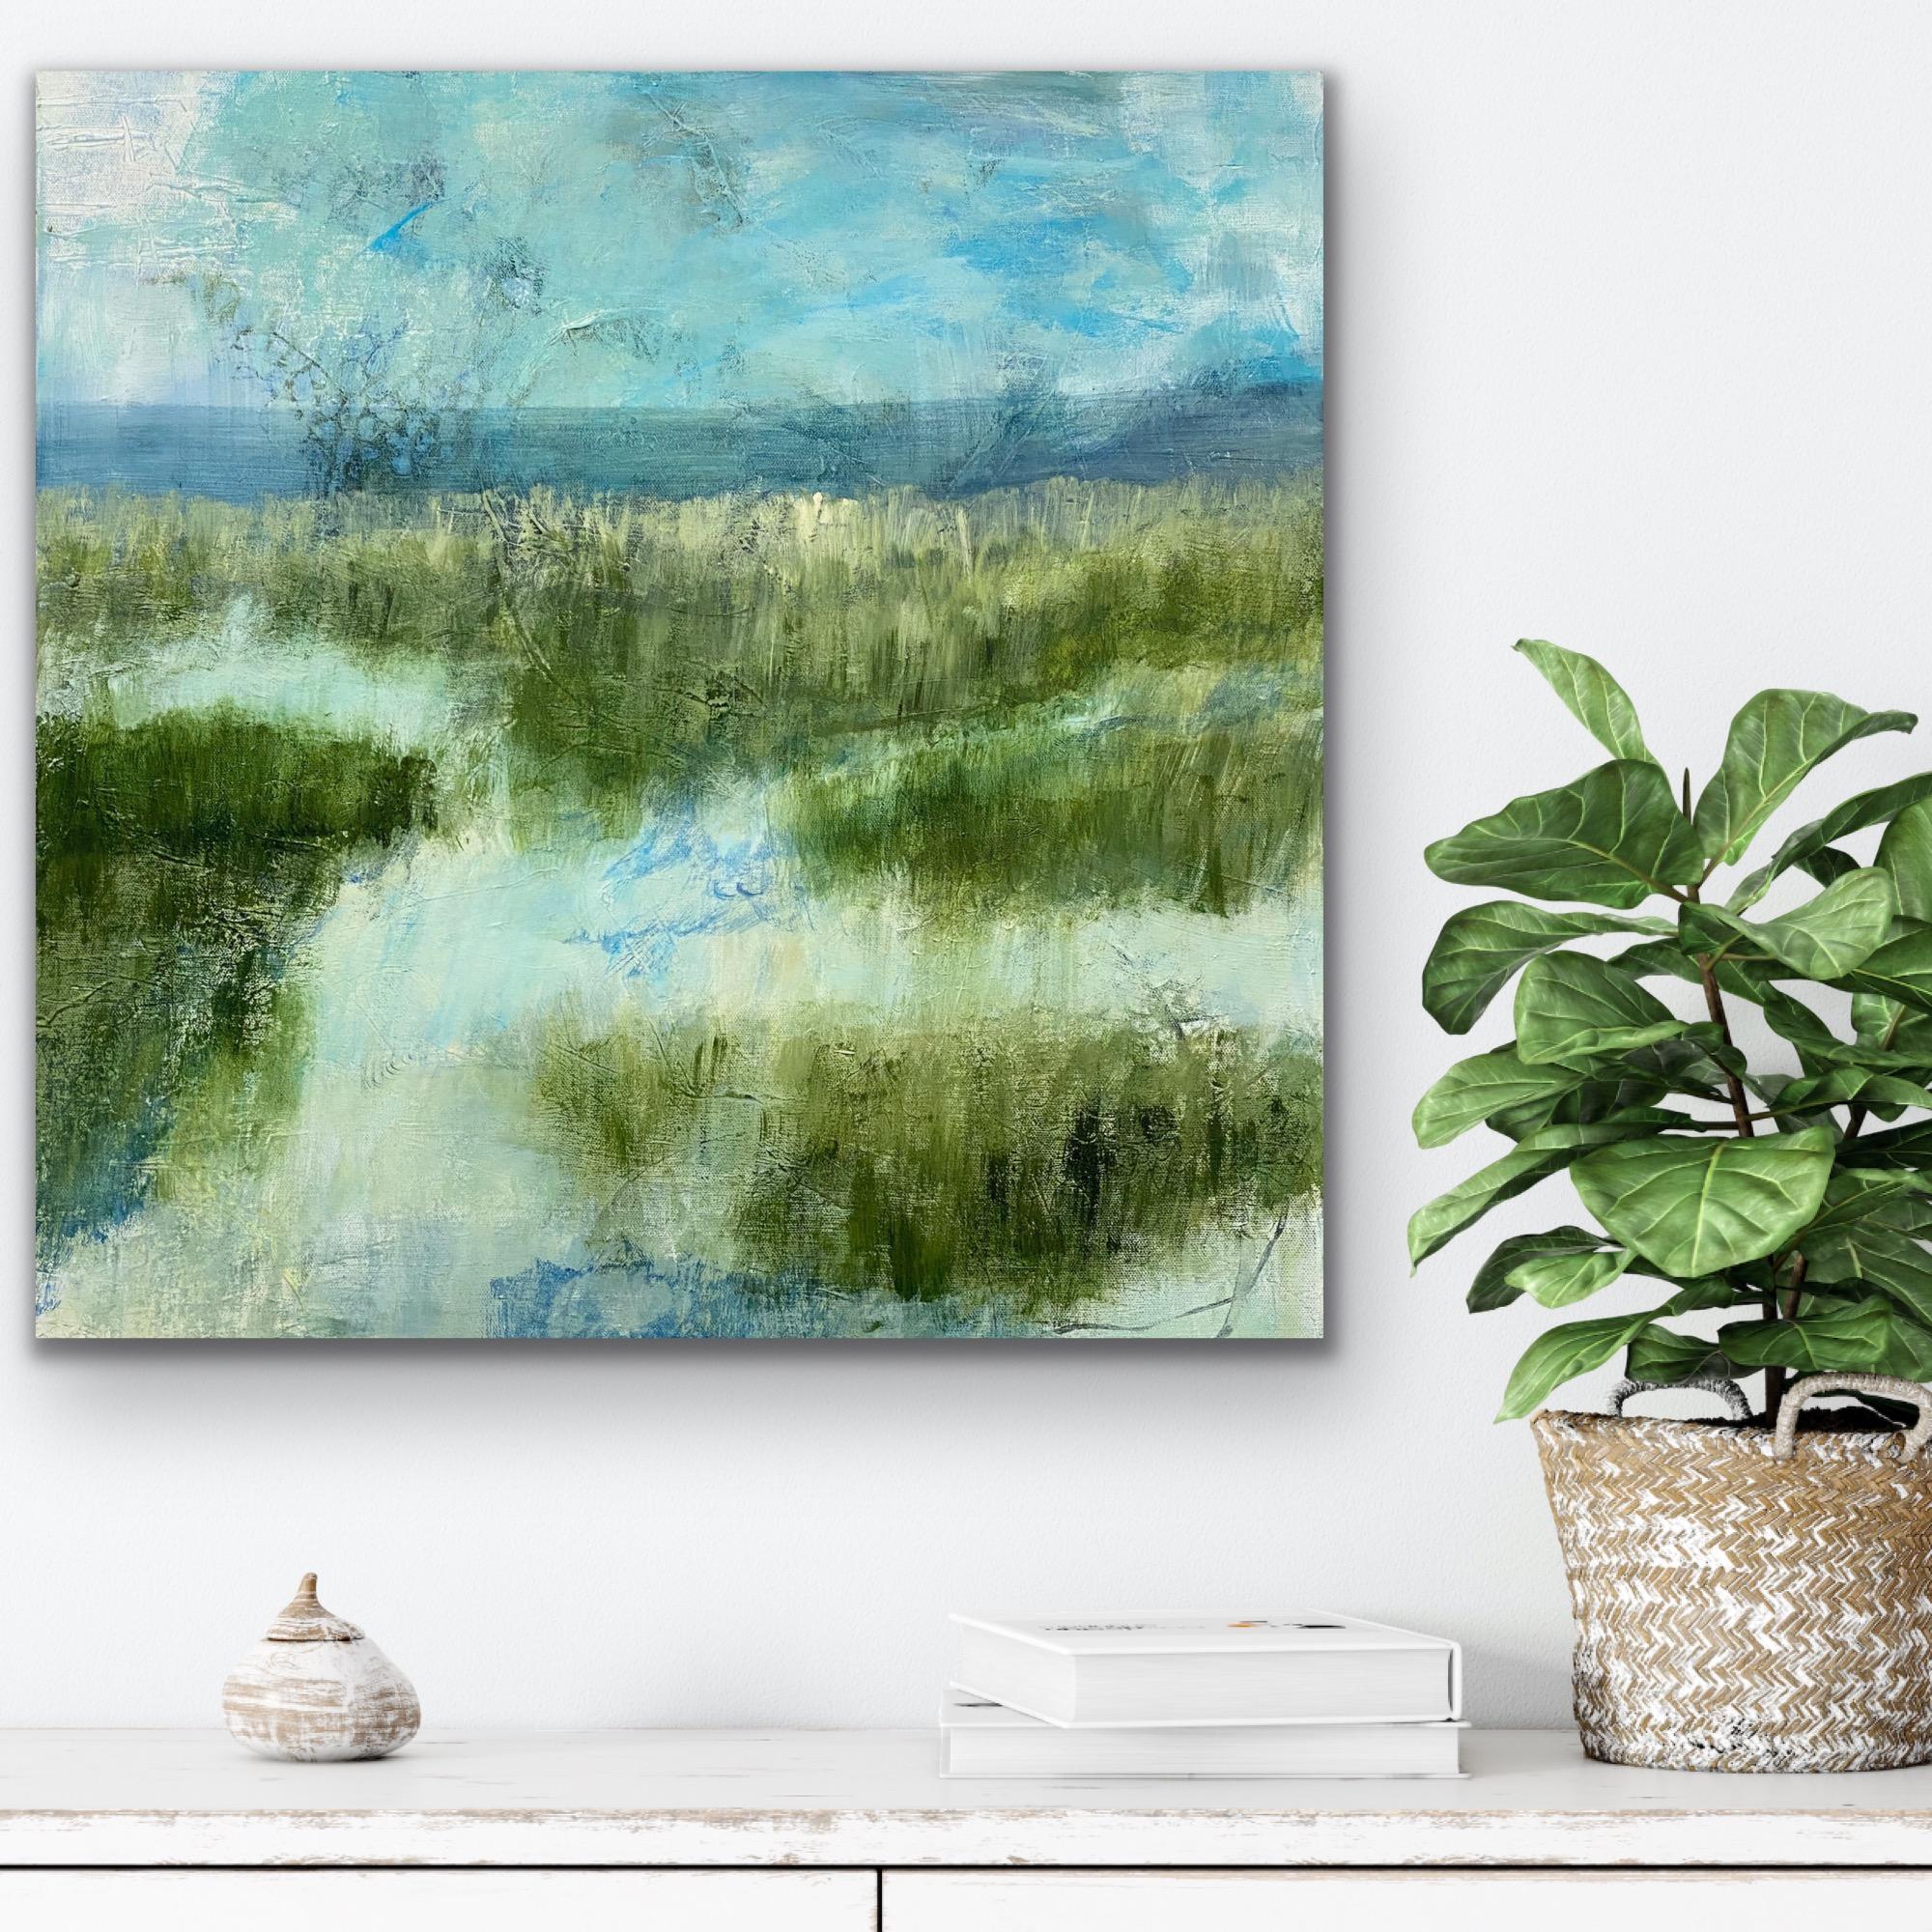 Where the marshes run low, abstract landscape, green and blue. Marshes For Sale 4